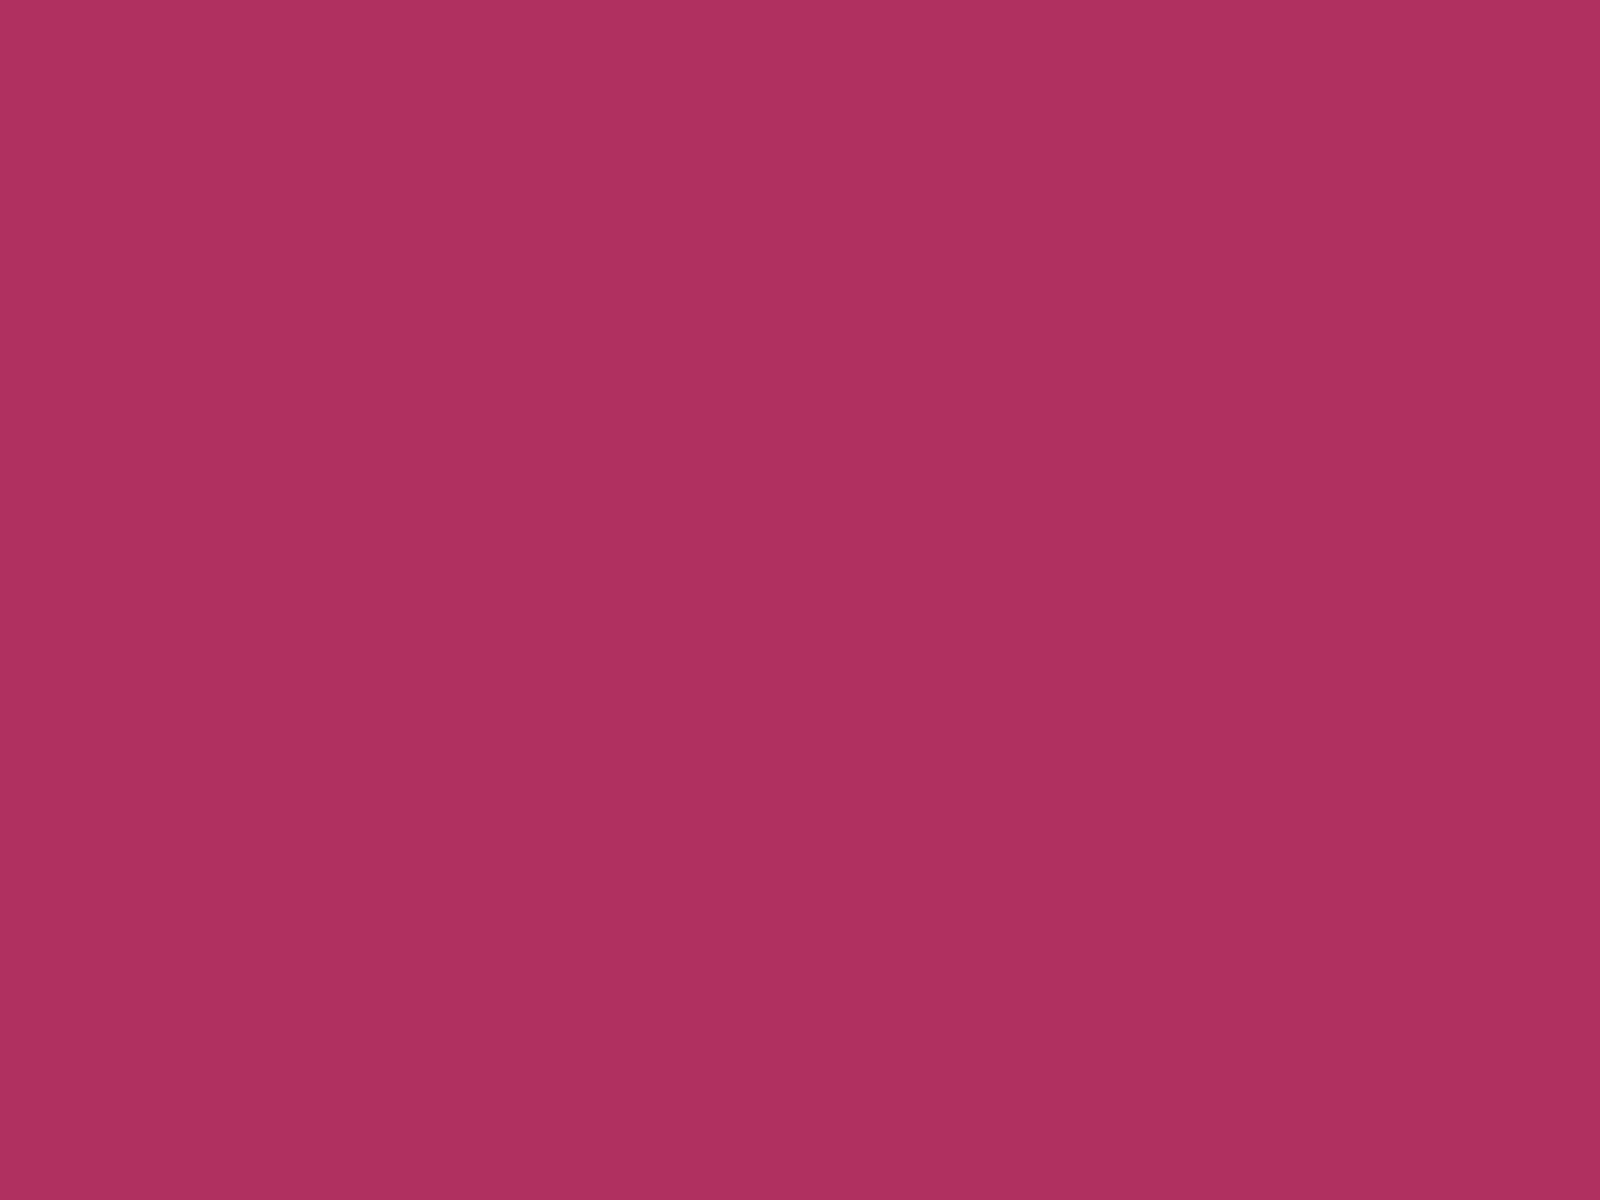 1600x1200 Maroon X11 Gui Solid Color Background